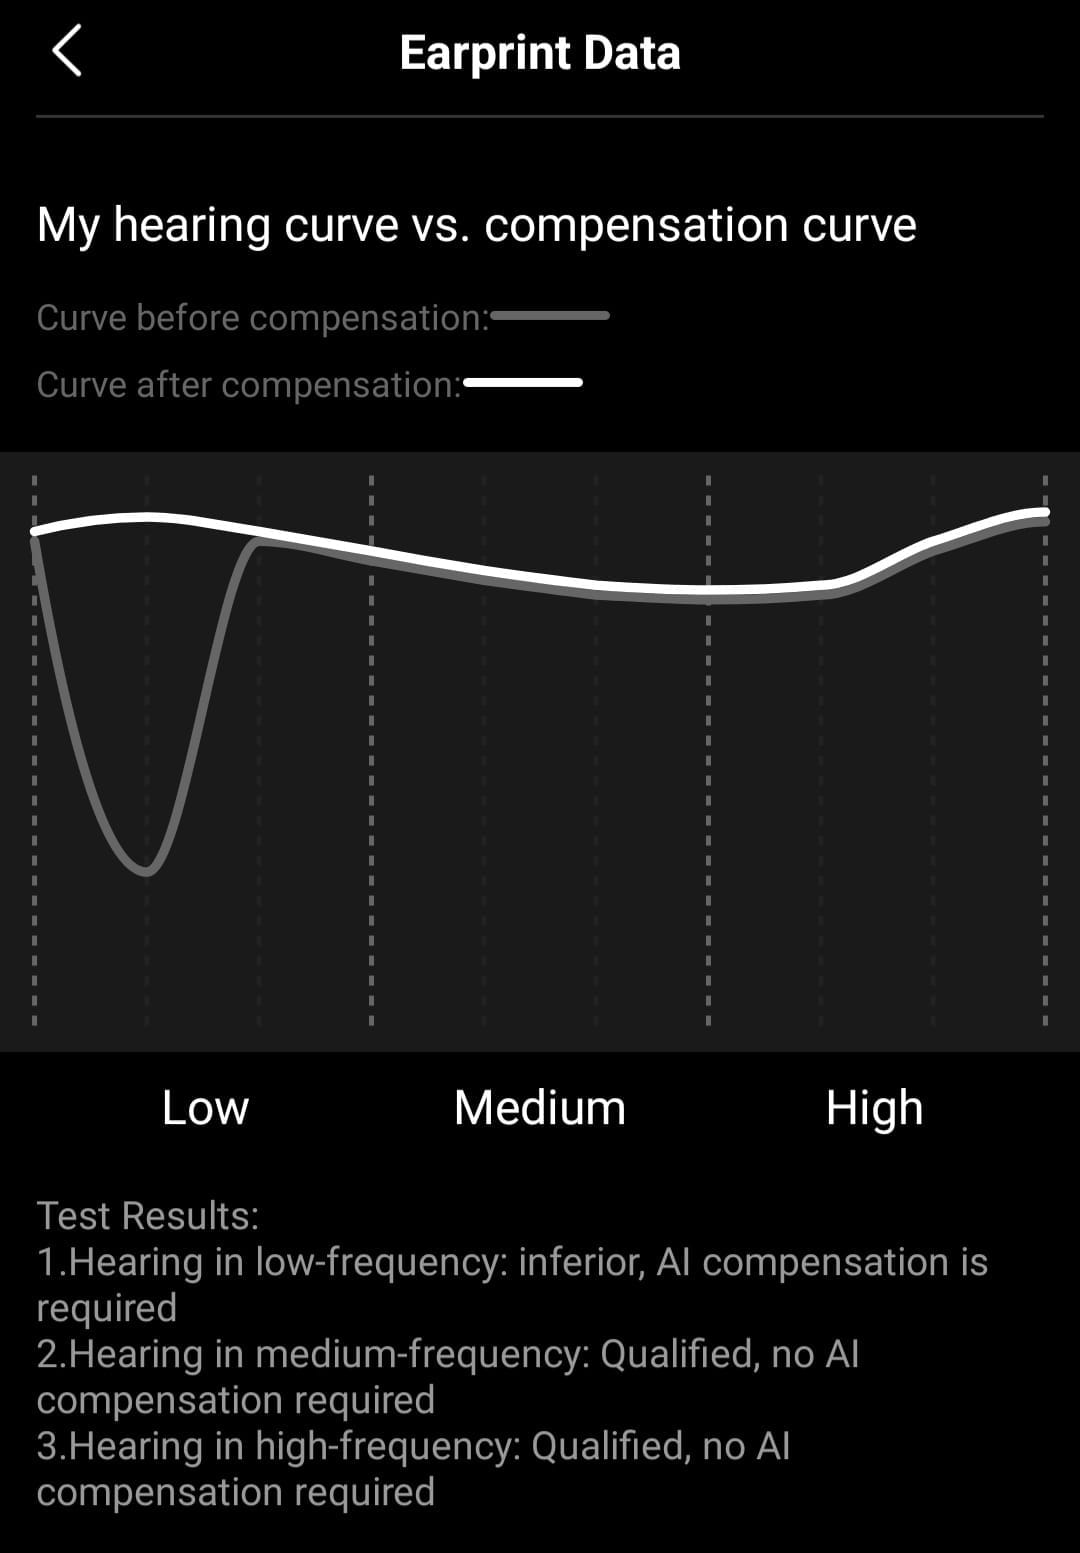 Image shows my hearing pattern test.